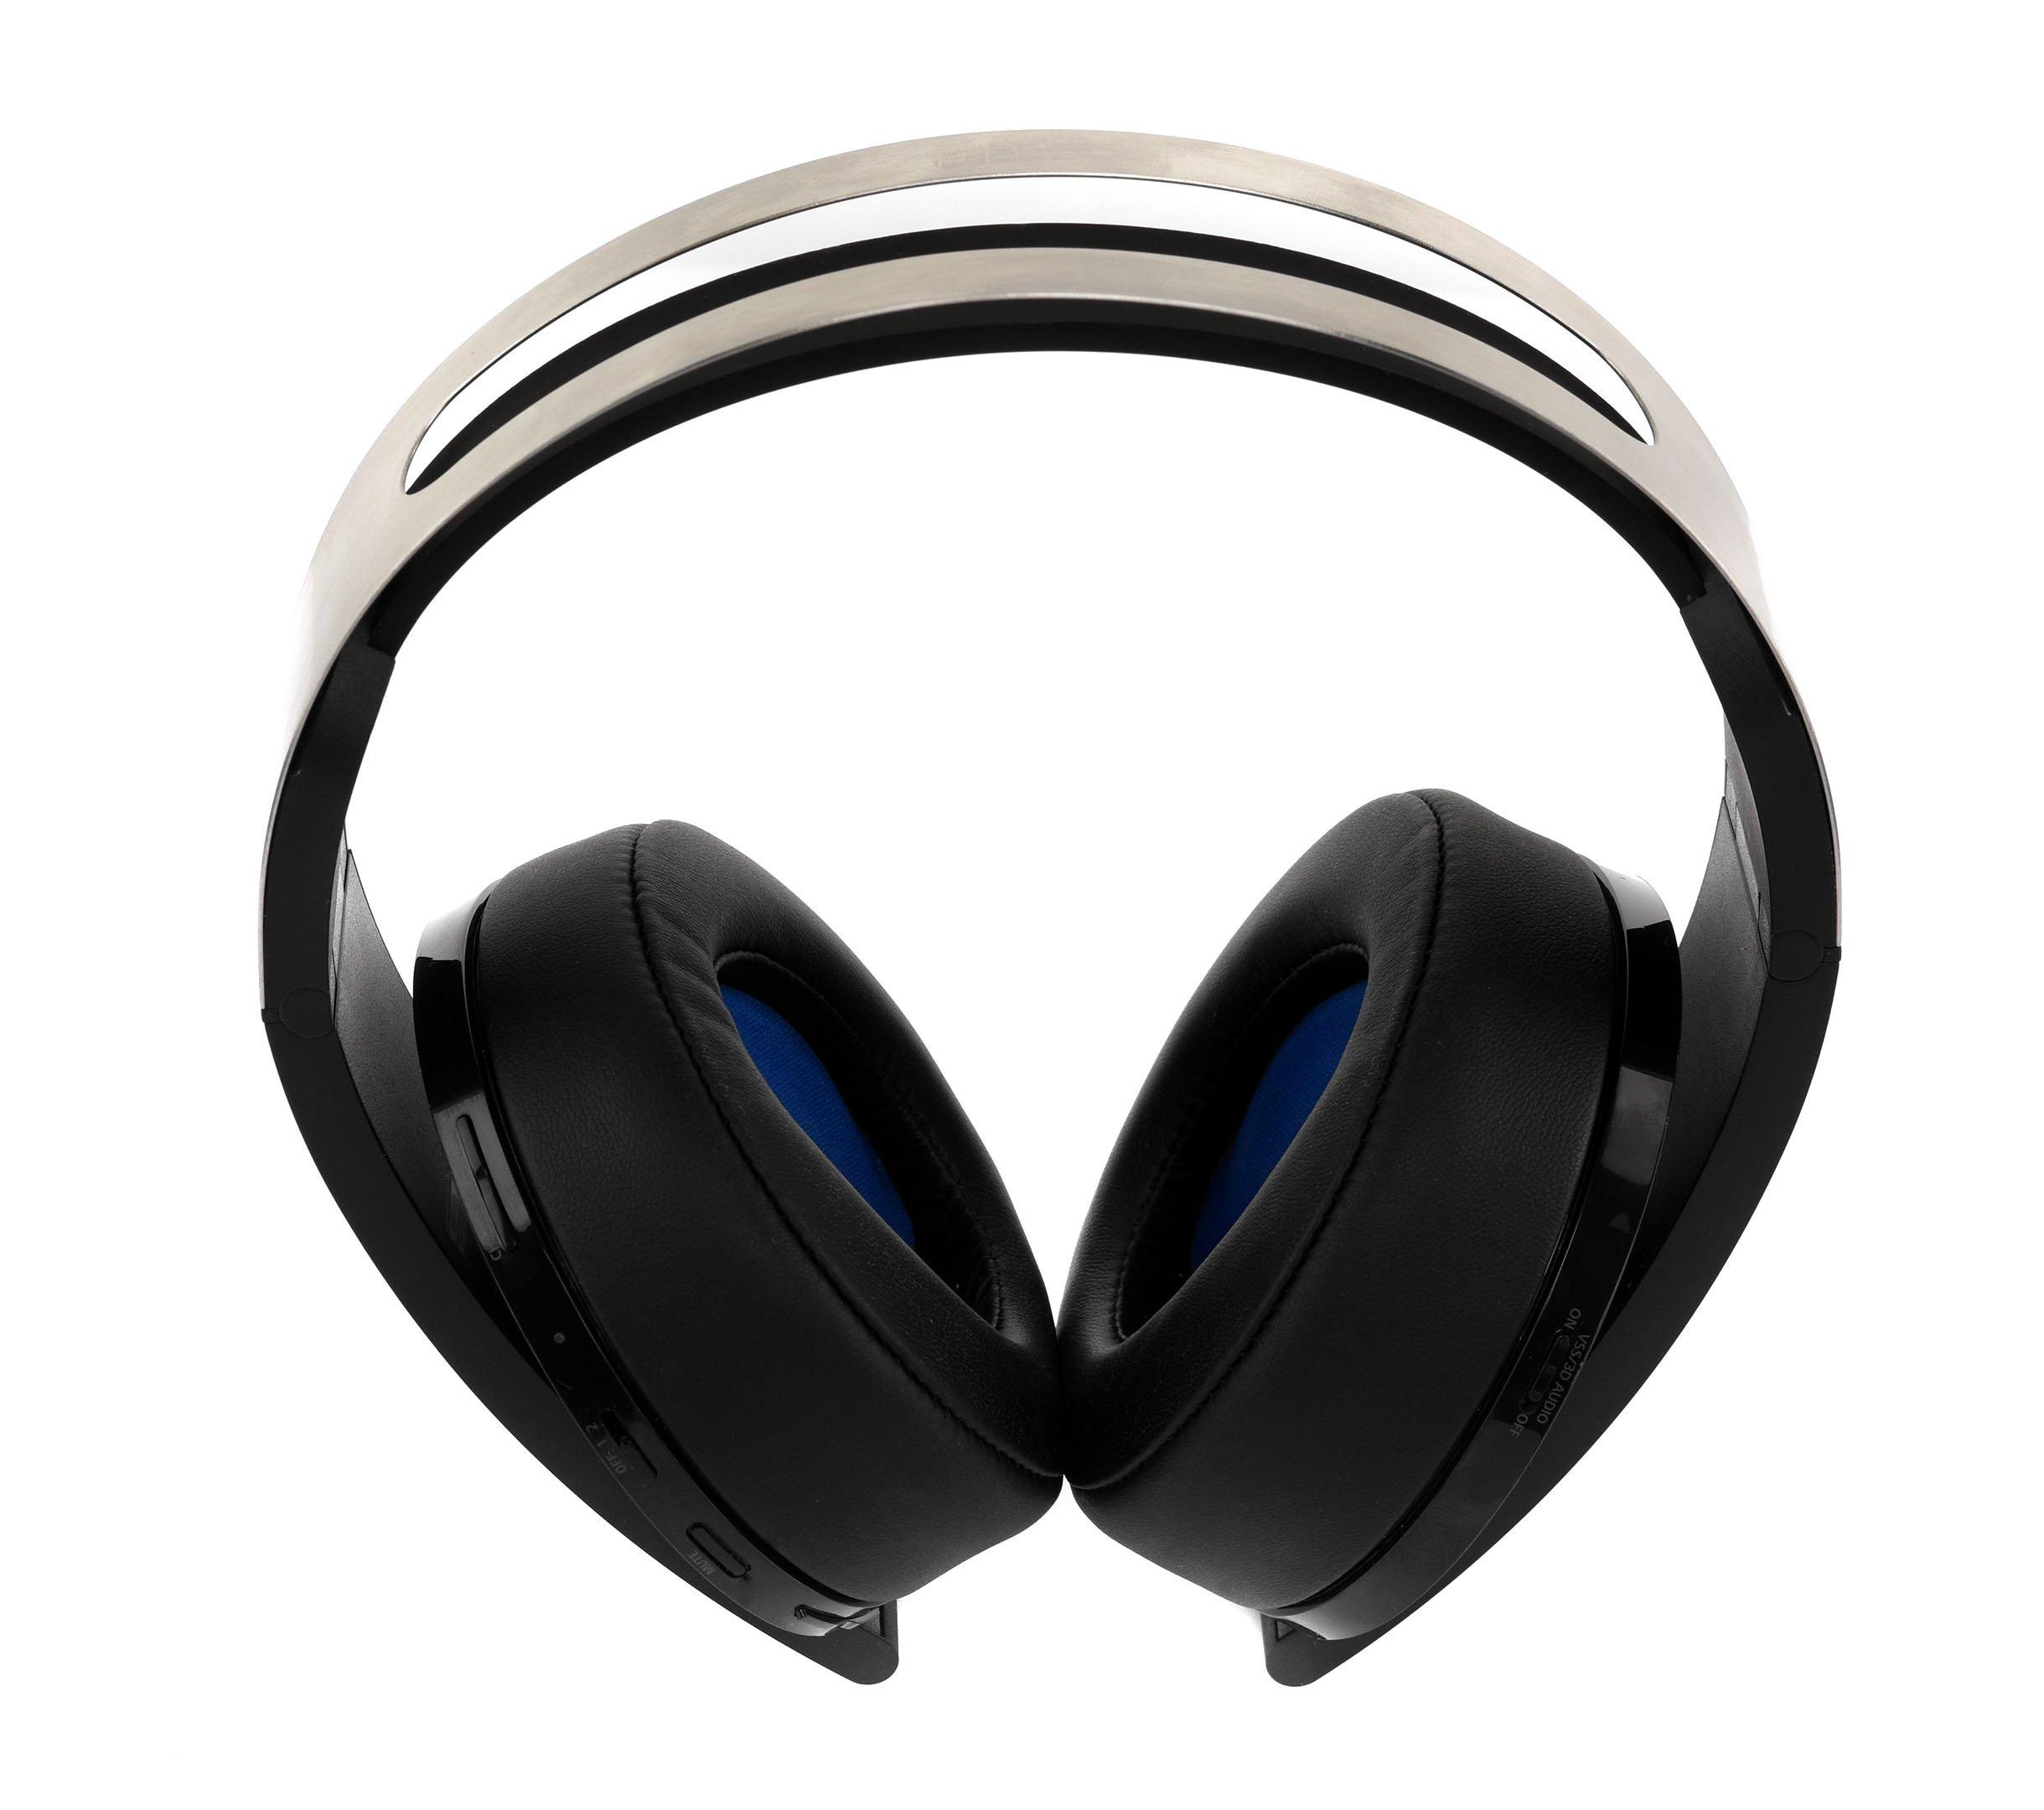 sony platinum wireless headset for playstation 4